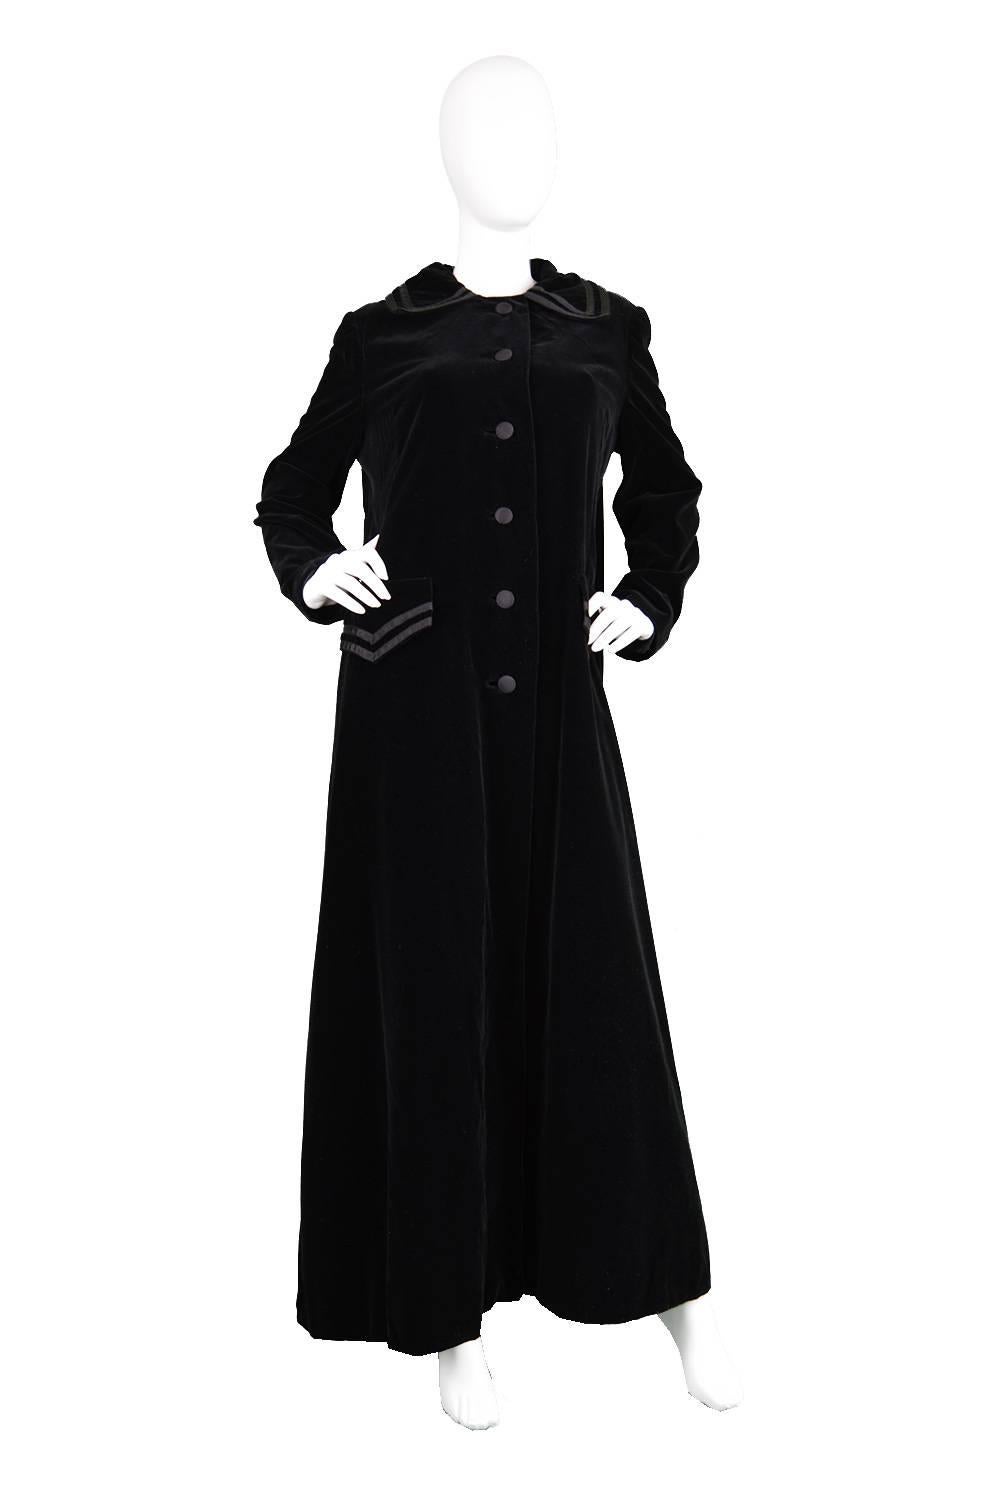 An incredible vintage maxi coat from the 1960s by iconic vintage designer Louis Féraud. This avant garde full length coat has some incredible fullness which falls towards the back and gives a swing silhouette. Is the perfect accompaniment to a